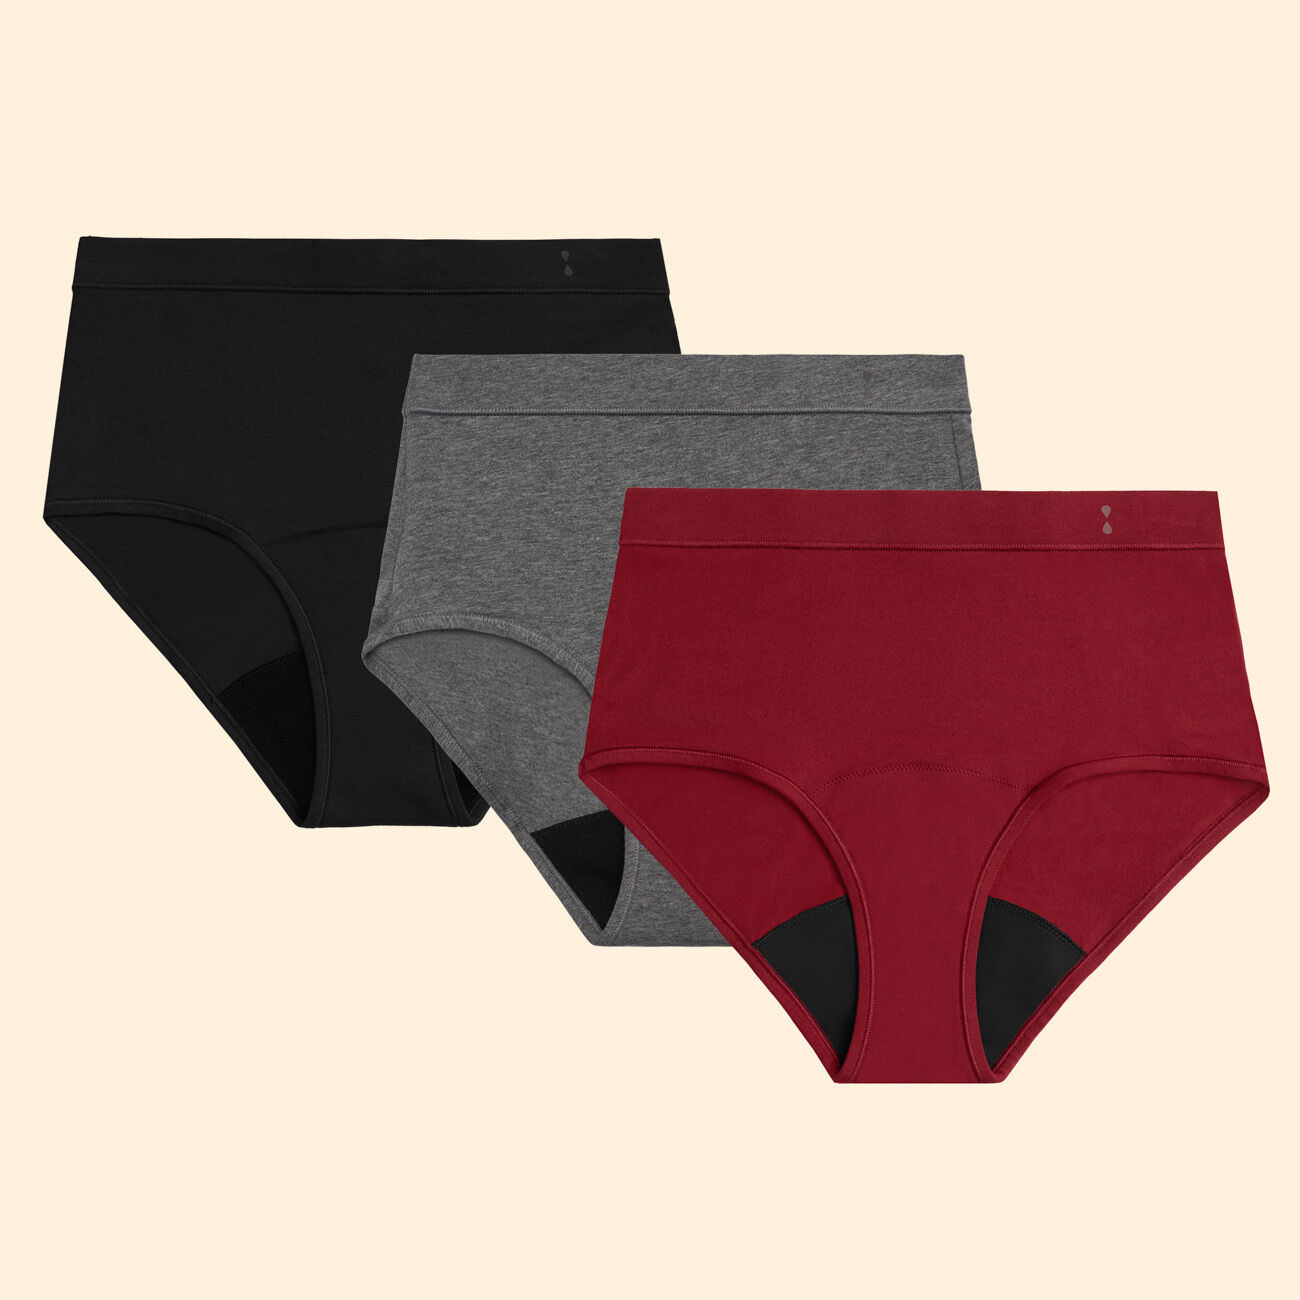 Thinx for All™ underwear by @shethinx absorb your period without